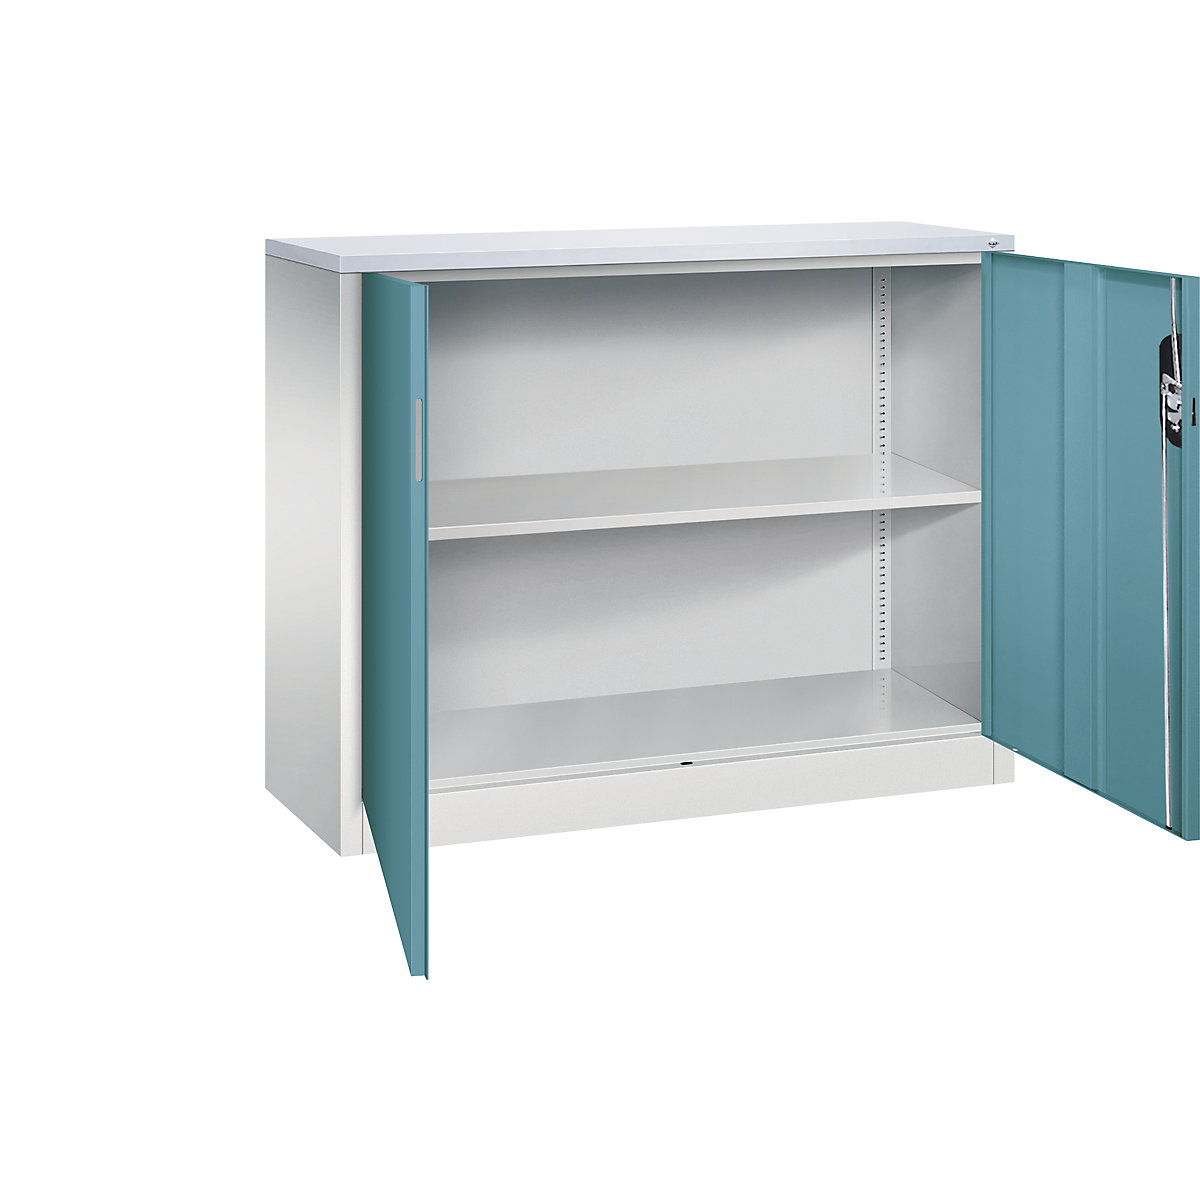 C+P – ACURADO filing sideboard, 2 file heights, HxWxD 1000 x 1200 x 400 mm, light grey / water blue